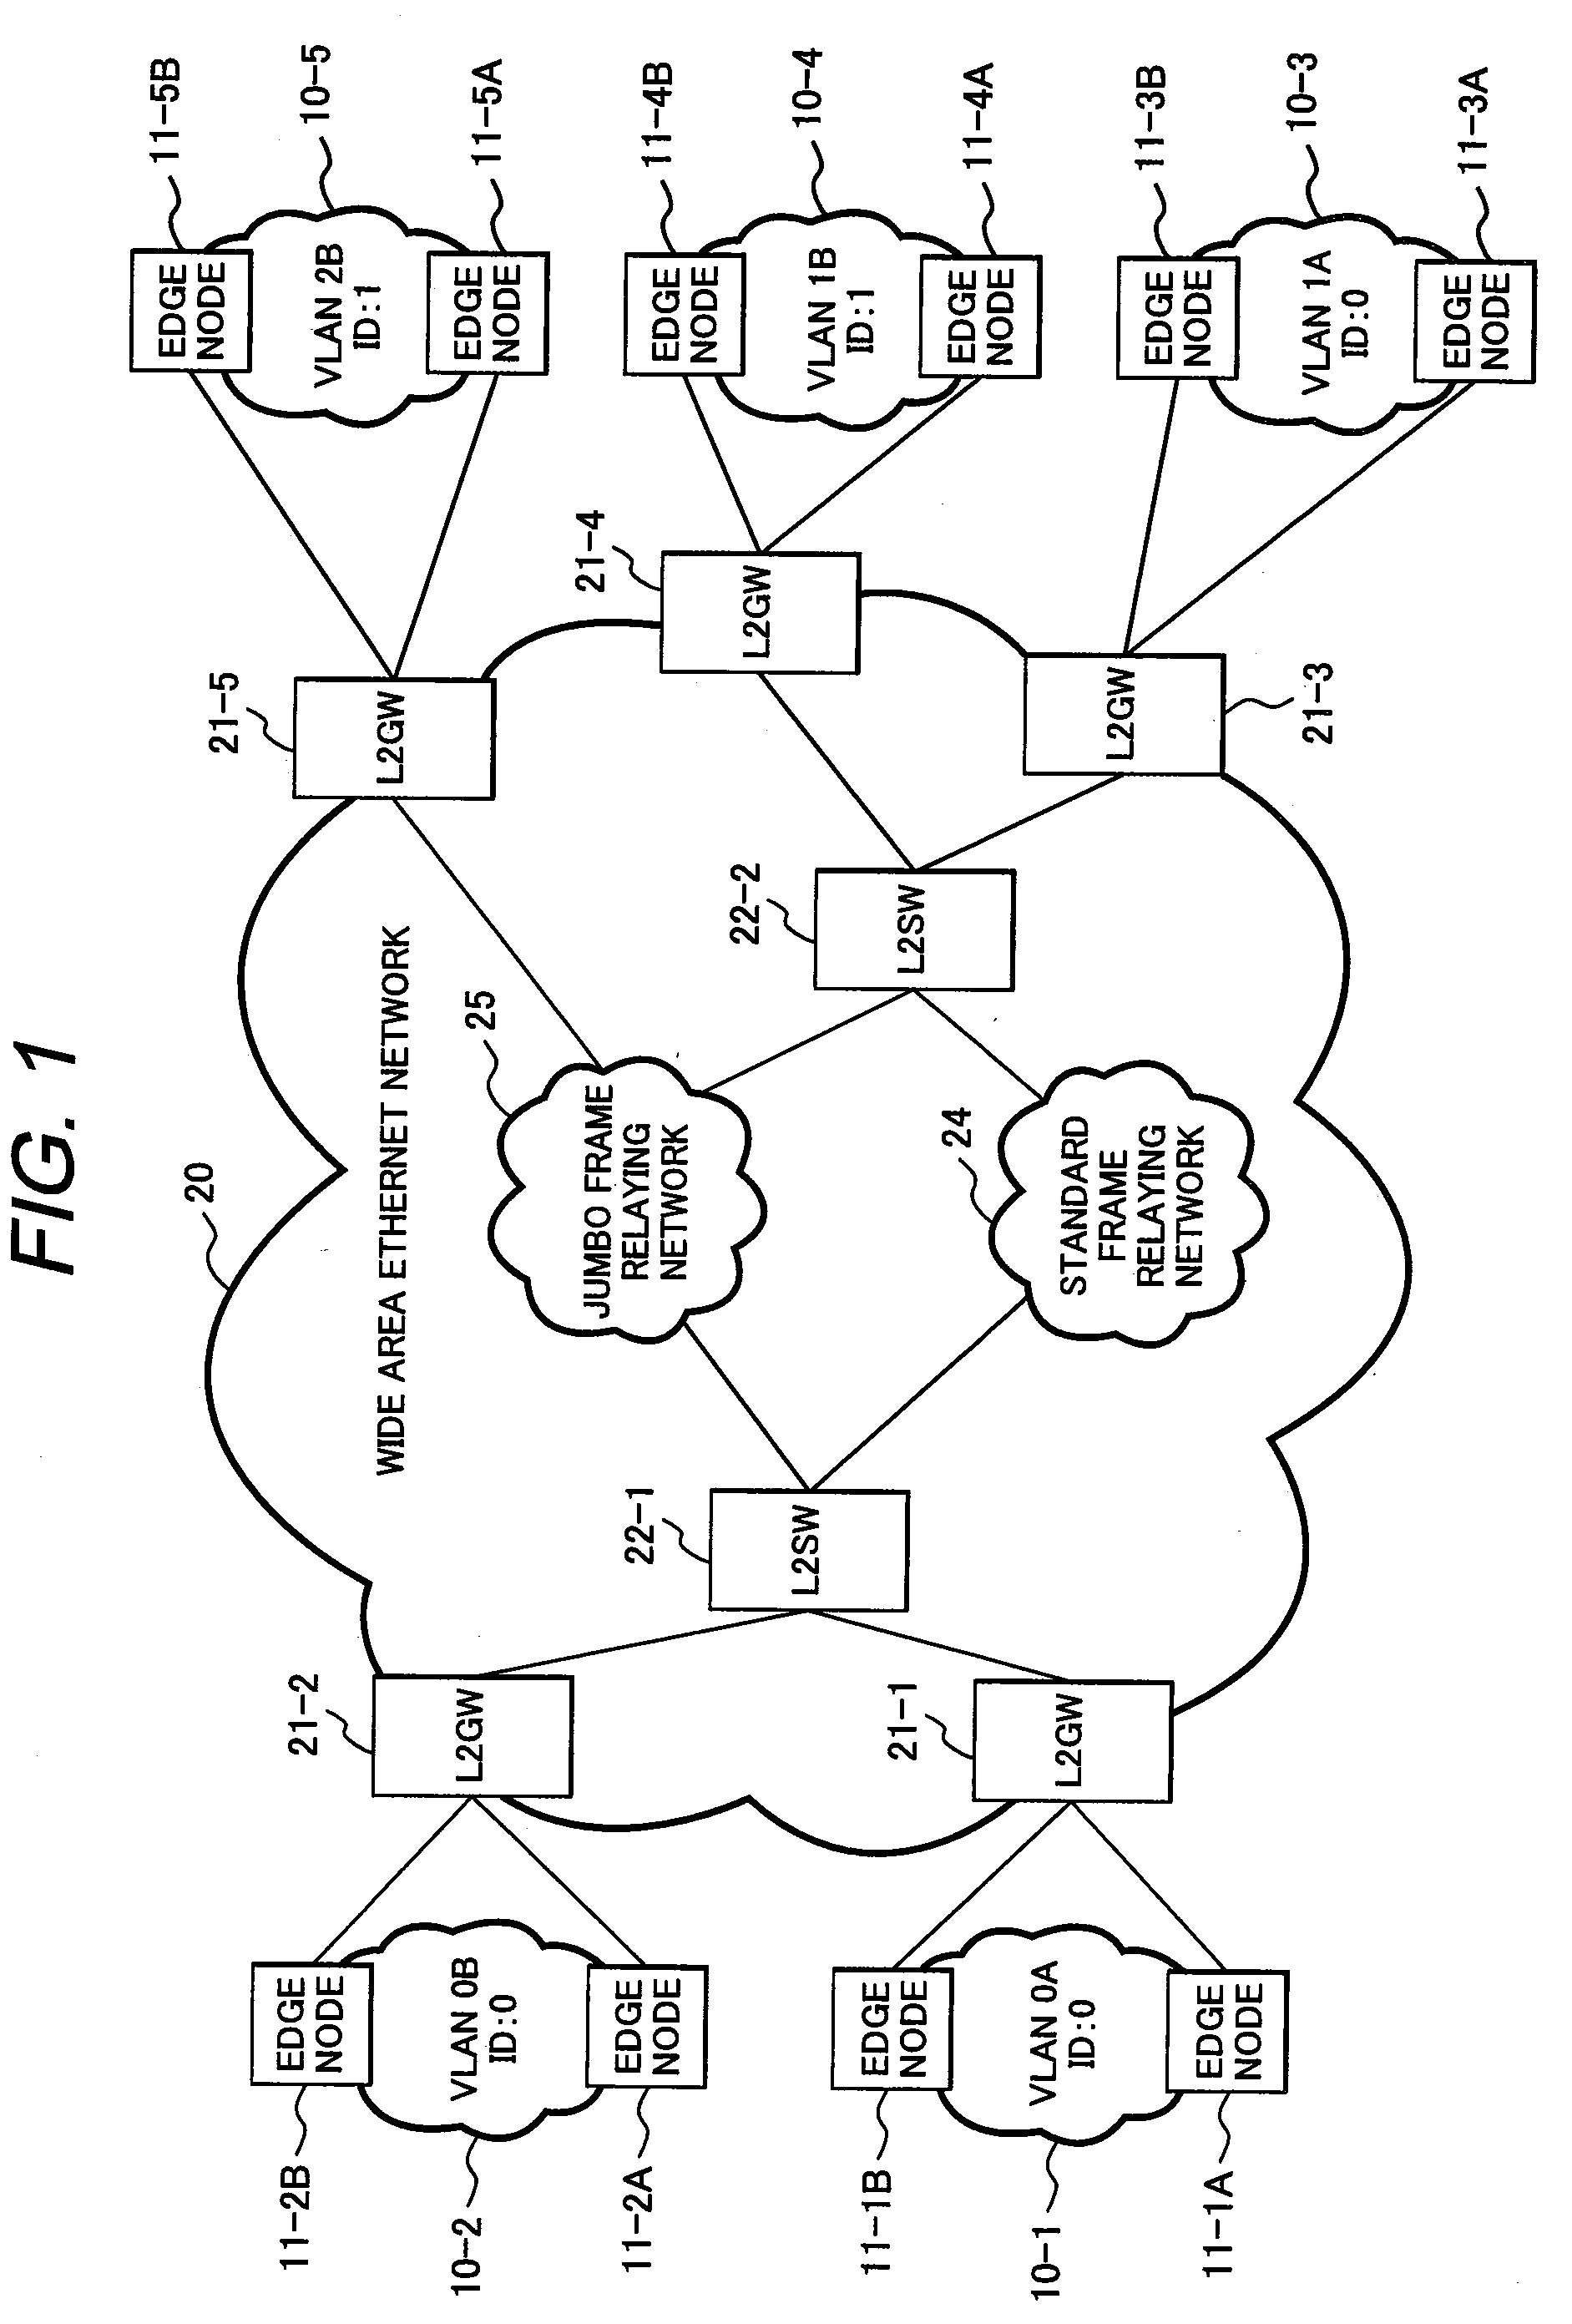 Packet forwarding apparatus suitable for forwarding extended frame